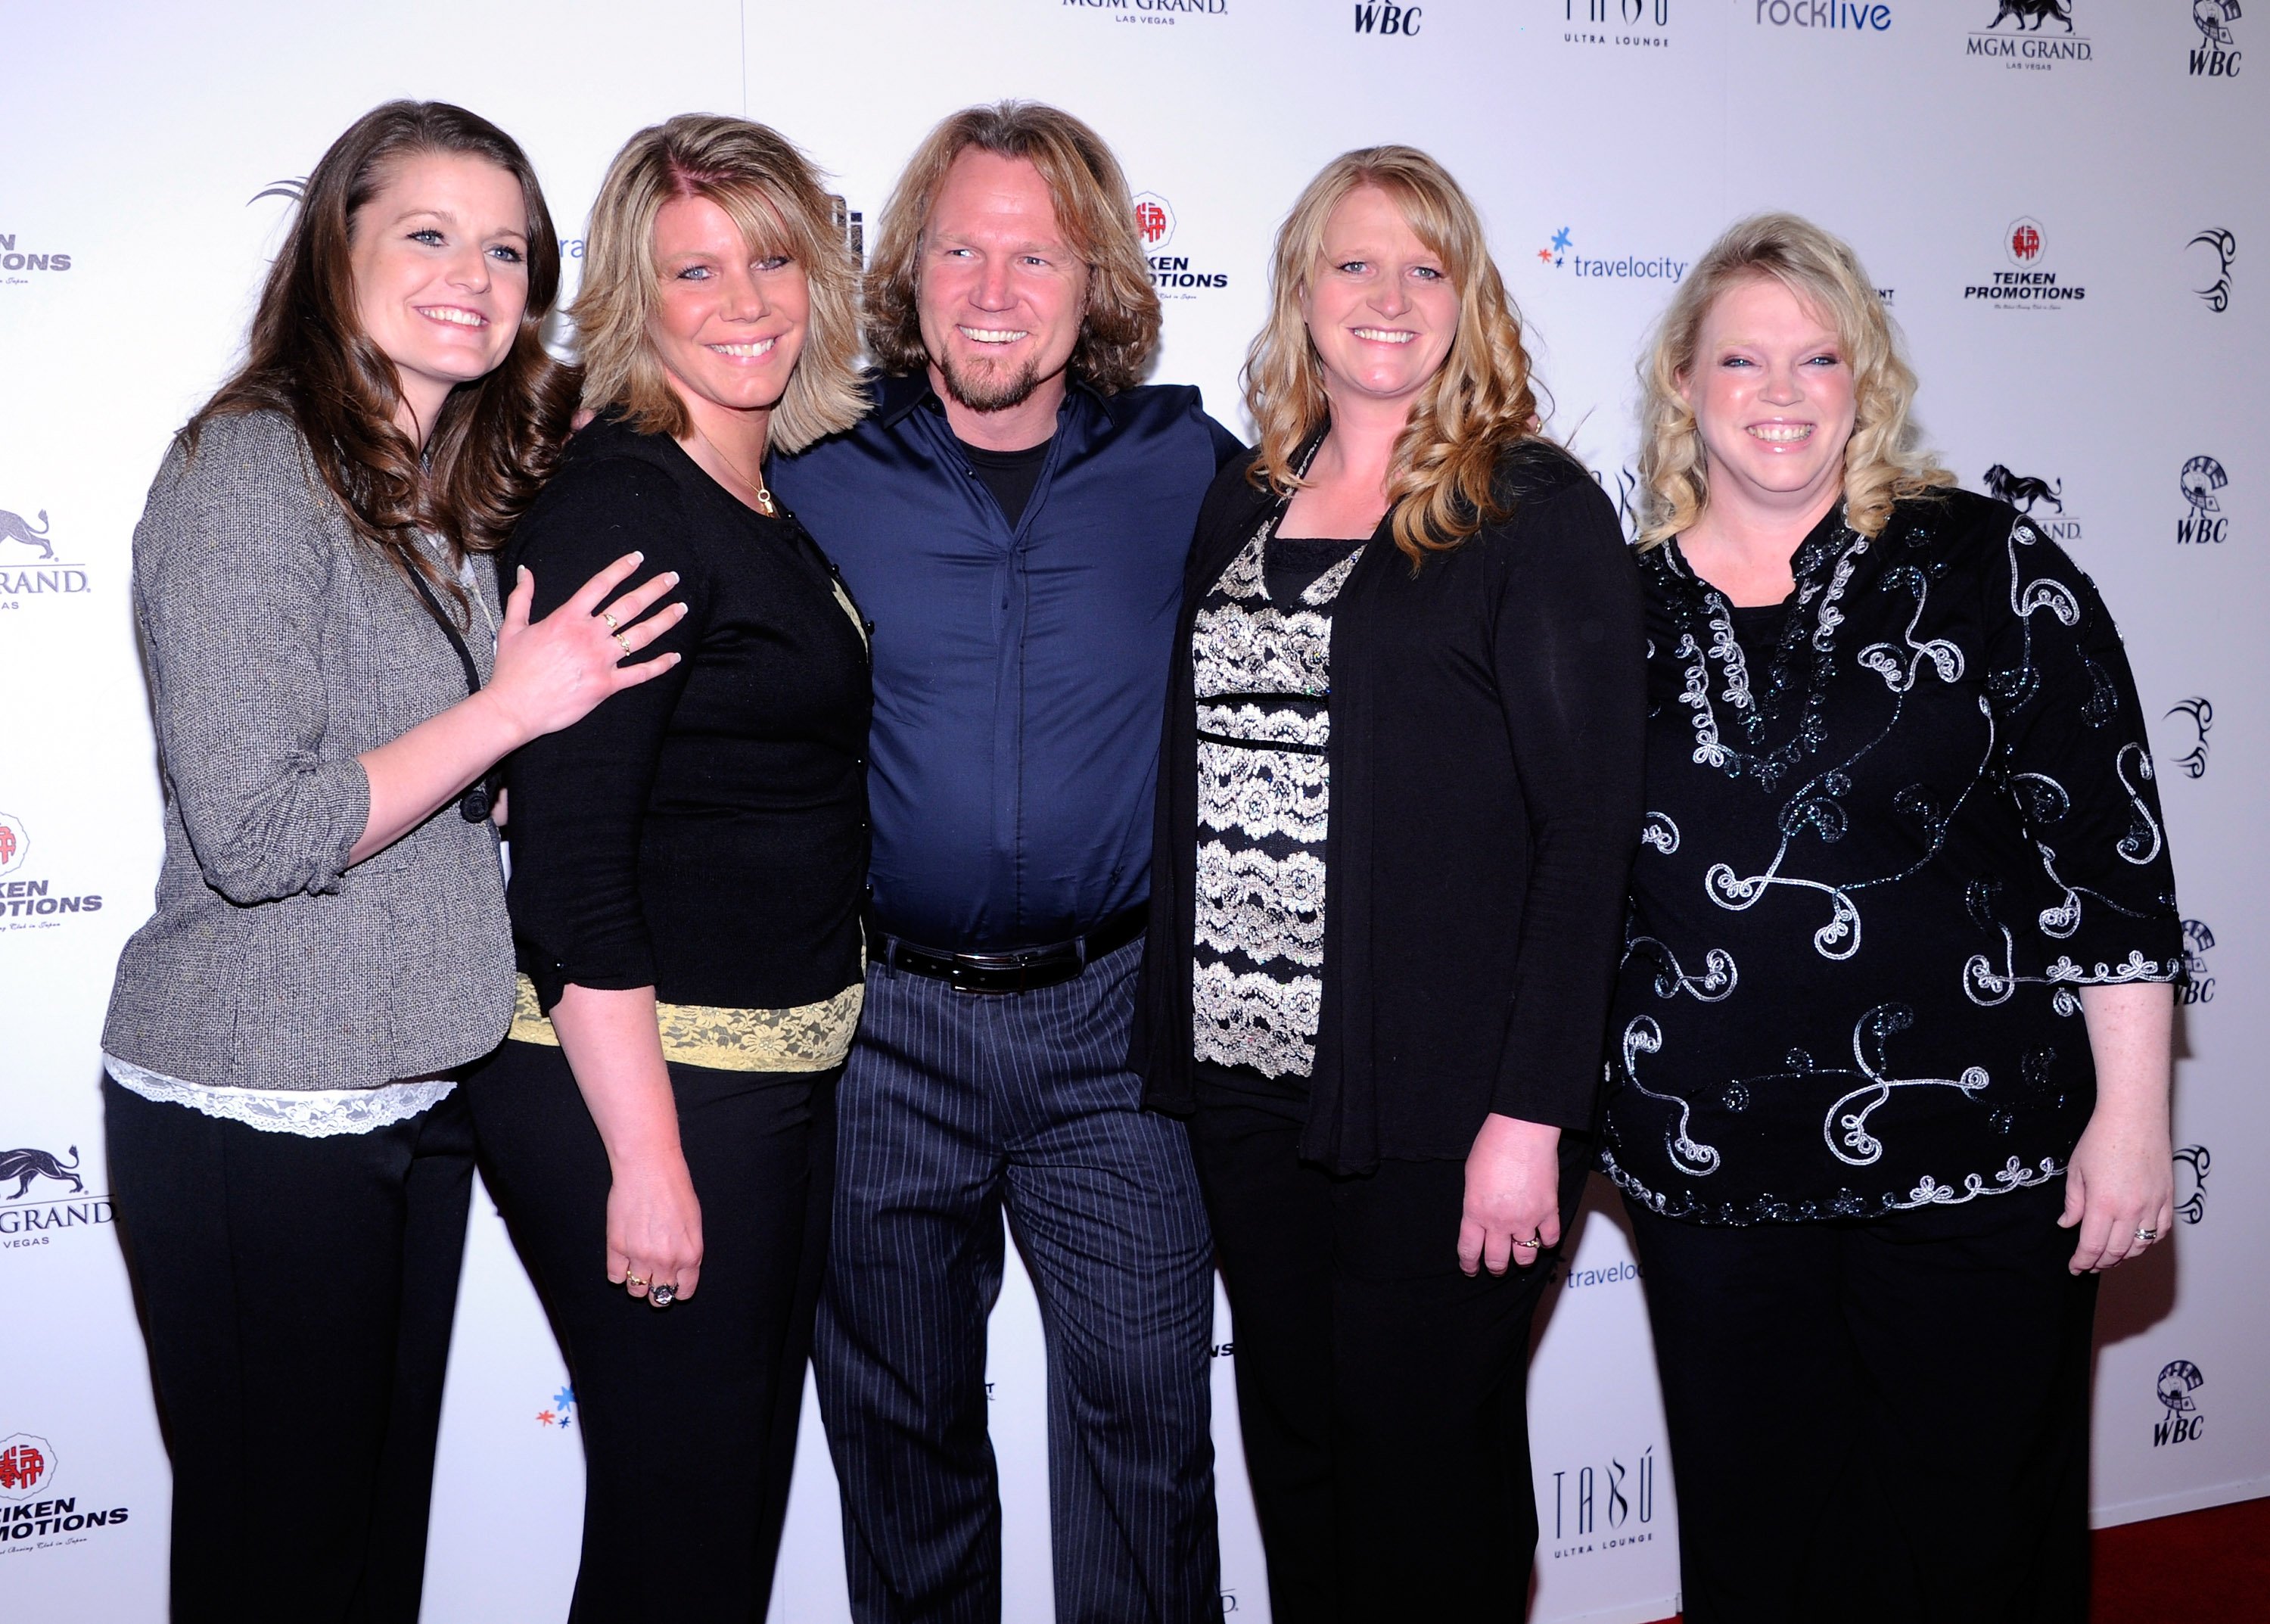 Robyn Brown, Meri Brown, Kody Brown, Christine Brown and Janelle Brown from "Sister Wives" arrive at the grand opening "Mike Tyson: Undisputed Truth - Live on Stage" on April 14, 2012, in Las Vegas, Nevada. | Source: Getty Images.